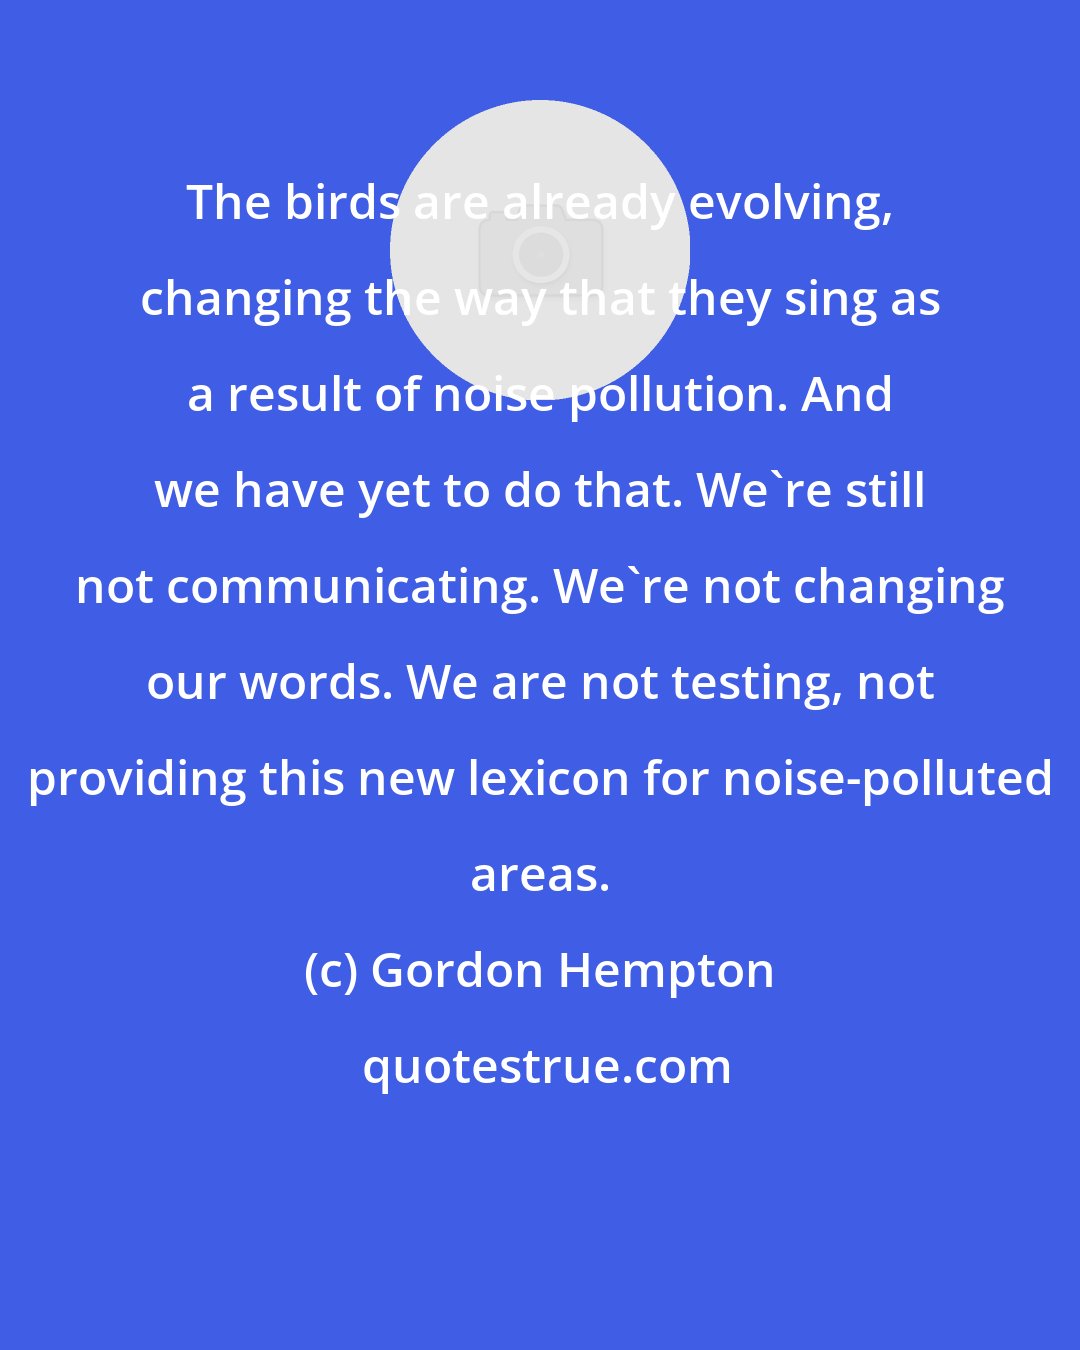 Gordon Hempton: The birds are already evolving, changing the way that they sing as a result of noise pollution. And we have yet to do that. We're still not communicating. We're not changing our words. We are not testing, not providing this new lexicon for noise-polluted areas.